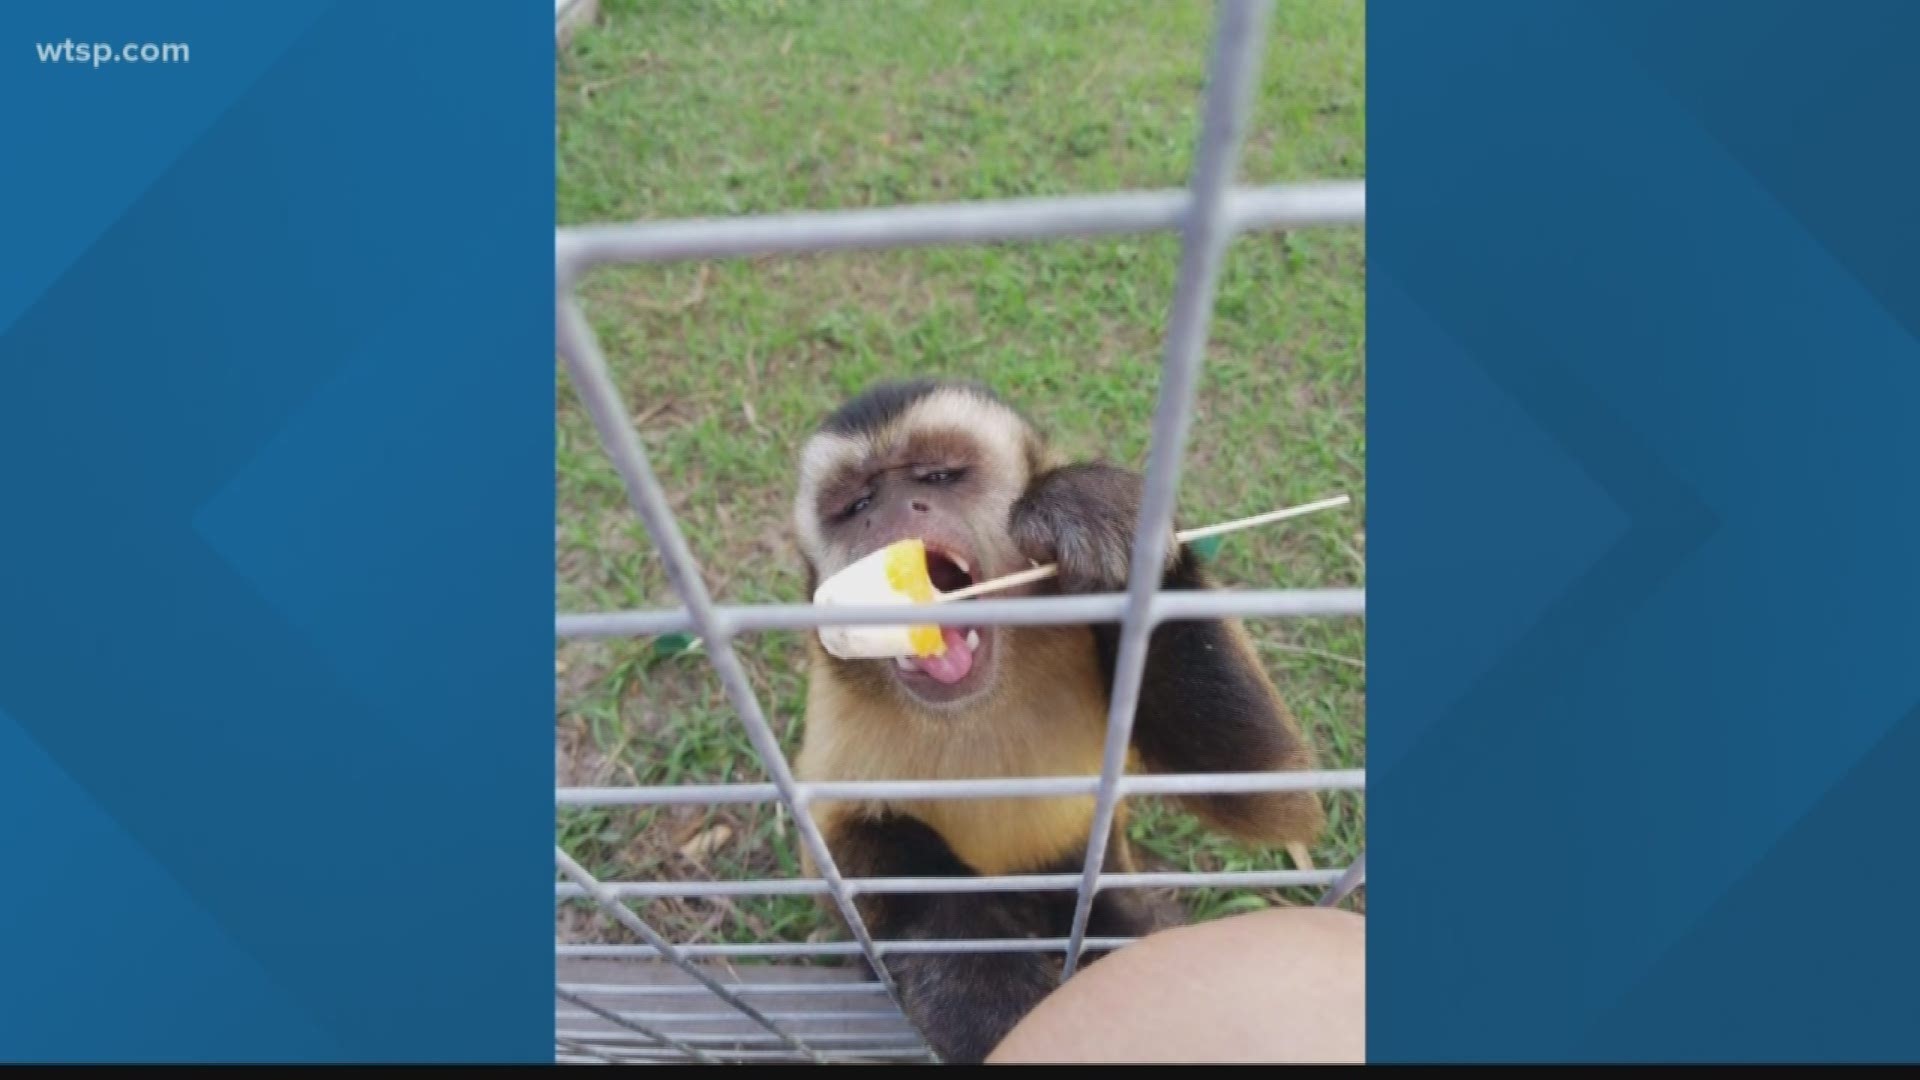 A missing Capuchin monkey has been found and returned home, its owner said.

Donnotto went missing last week in the area of Handcart Road in Zephyrhills. The owner said they've had the domesticated primate for two years and he has never gotten out before.